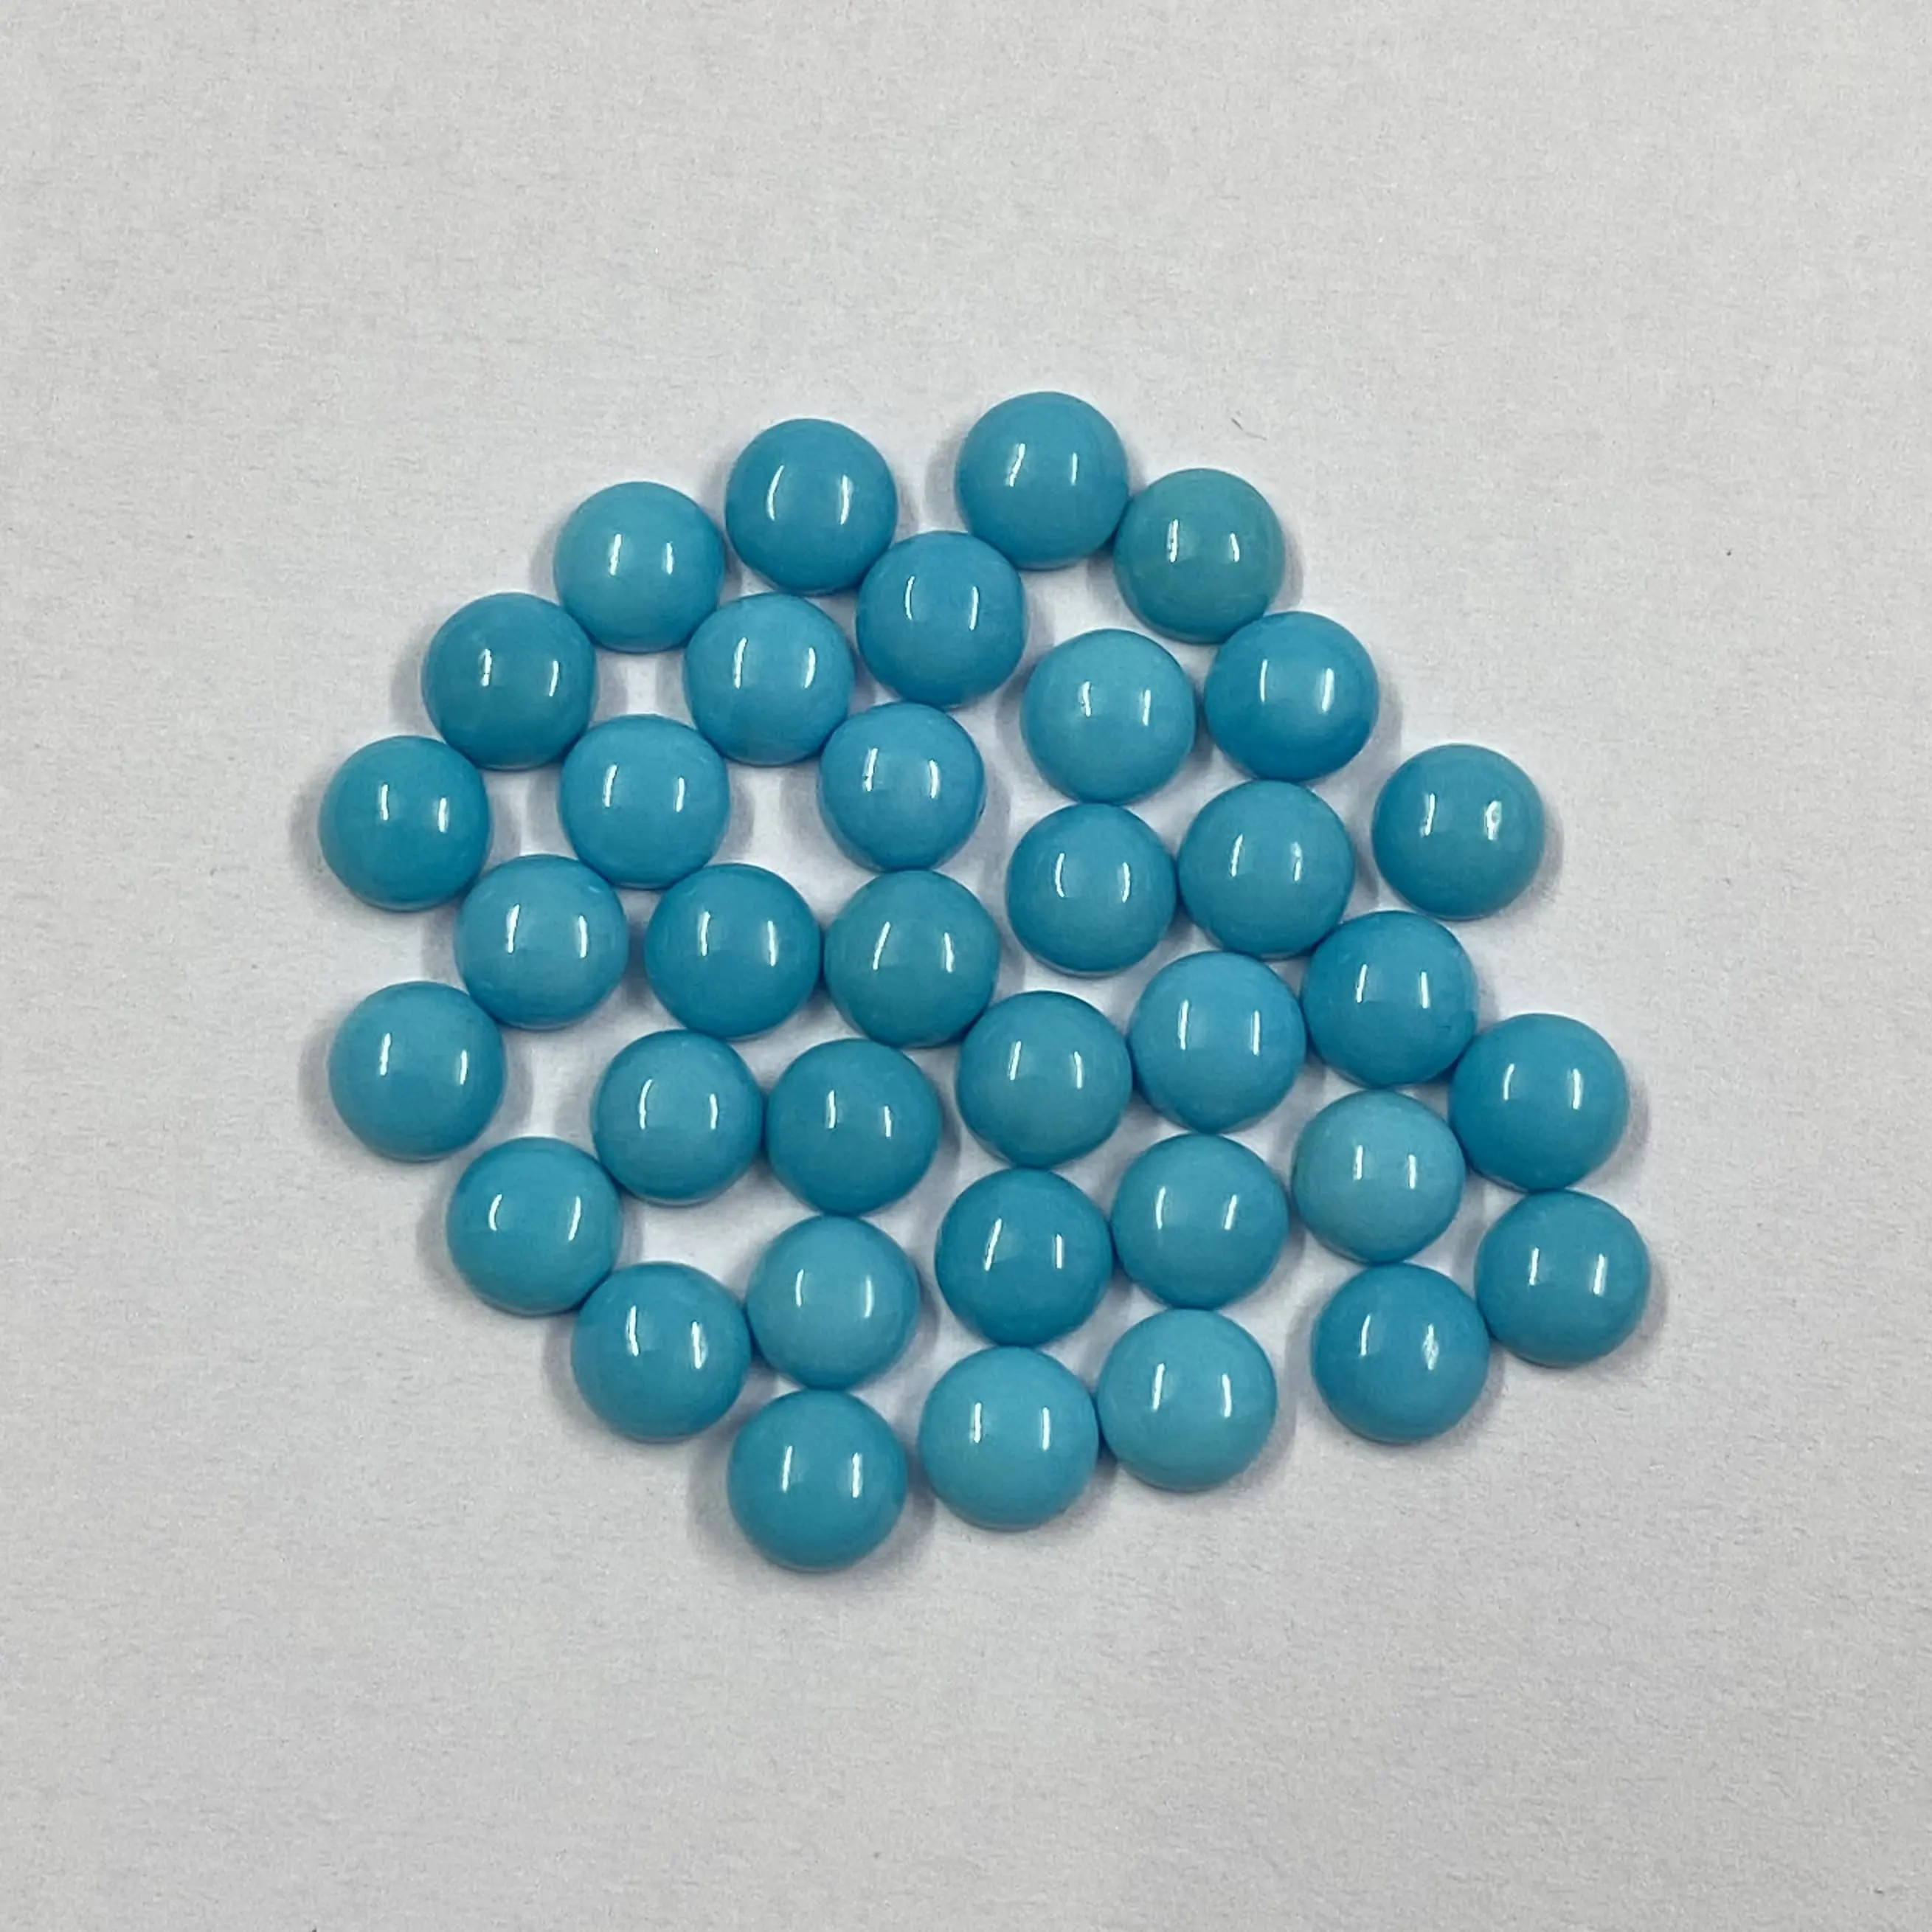 Ready To Ship High Quality Unique 6mm Natural AAA Arizona Turquoise Round Healing Cabochon Loose Gemstones Supplier